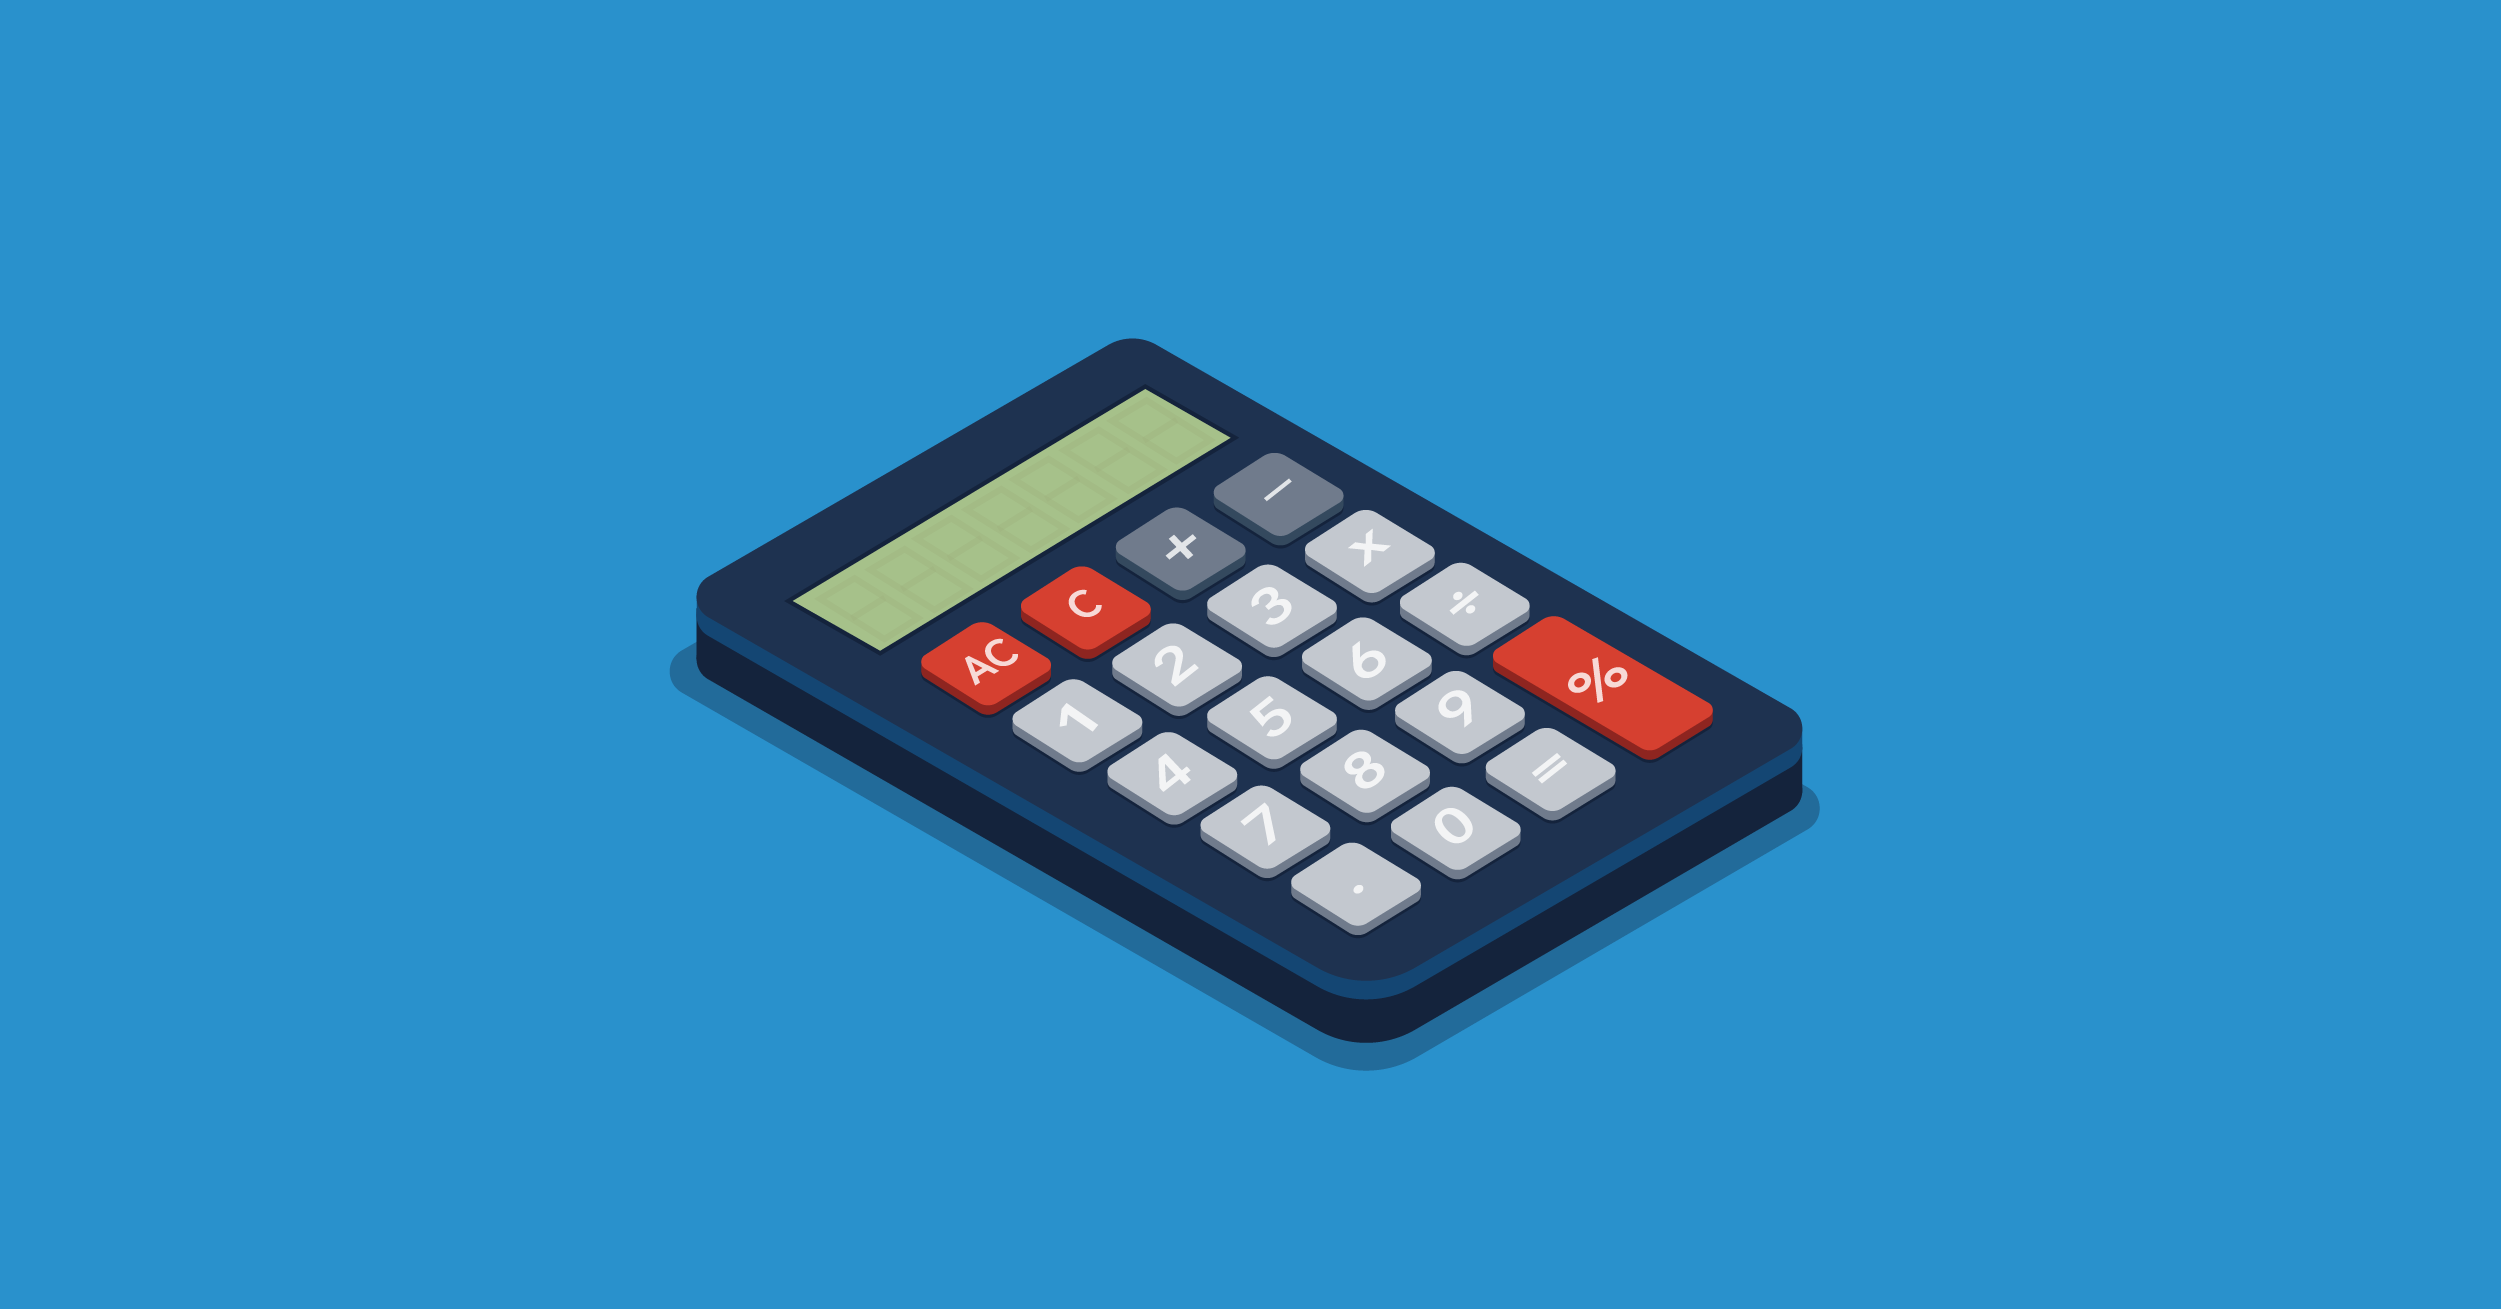 How to save money as a student - calculator image